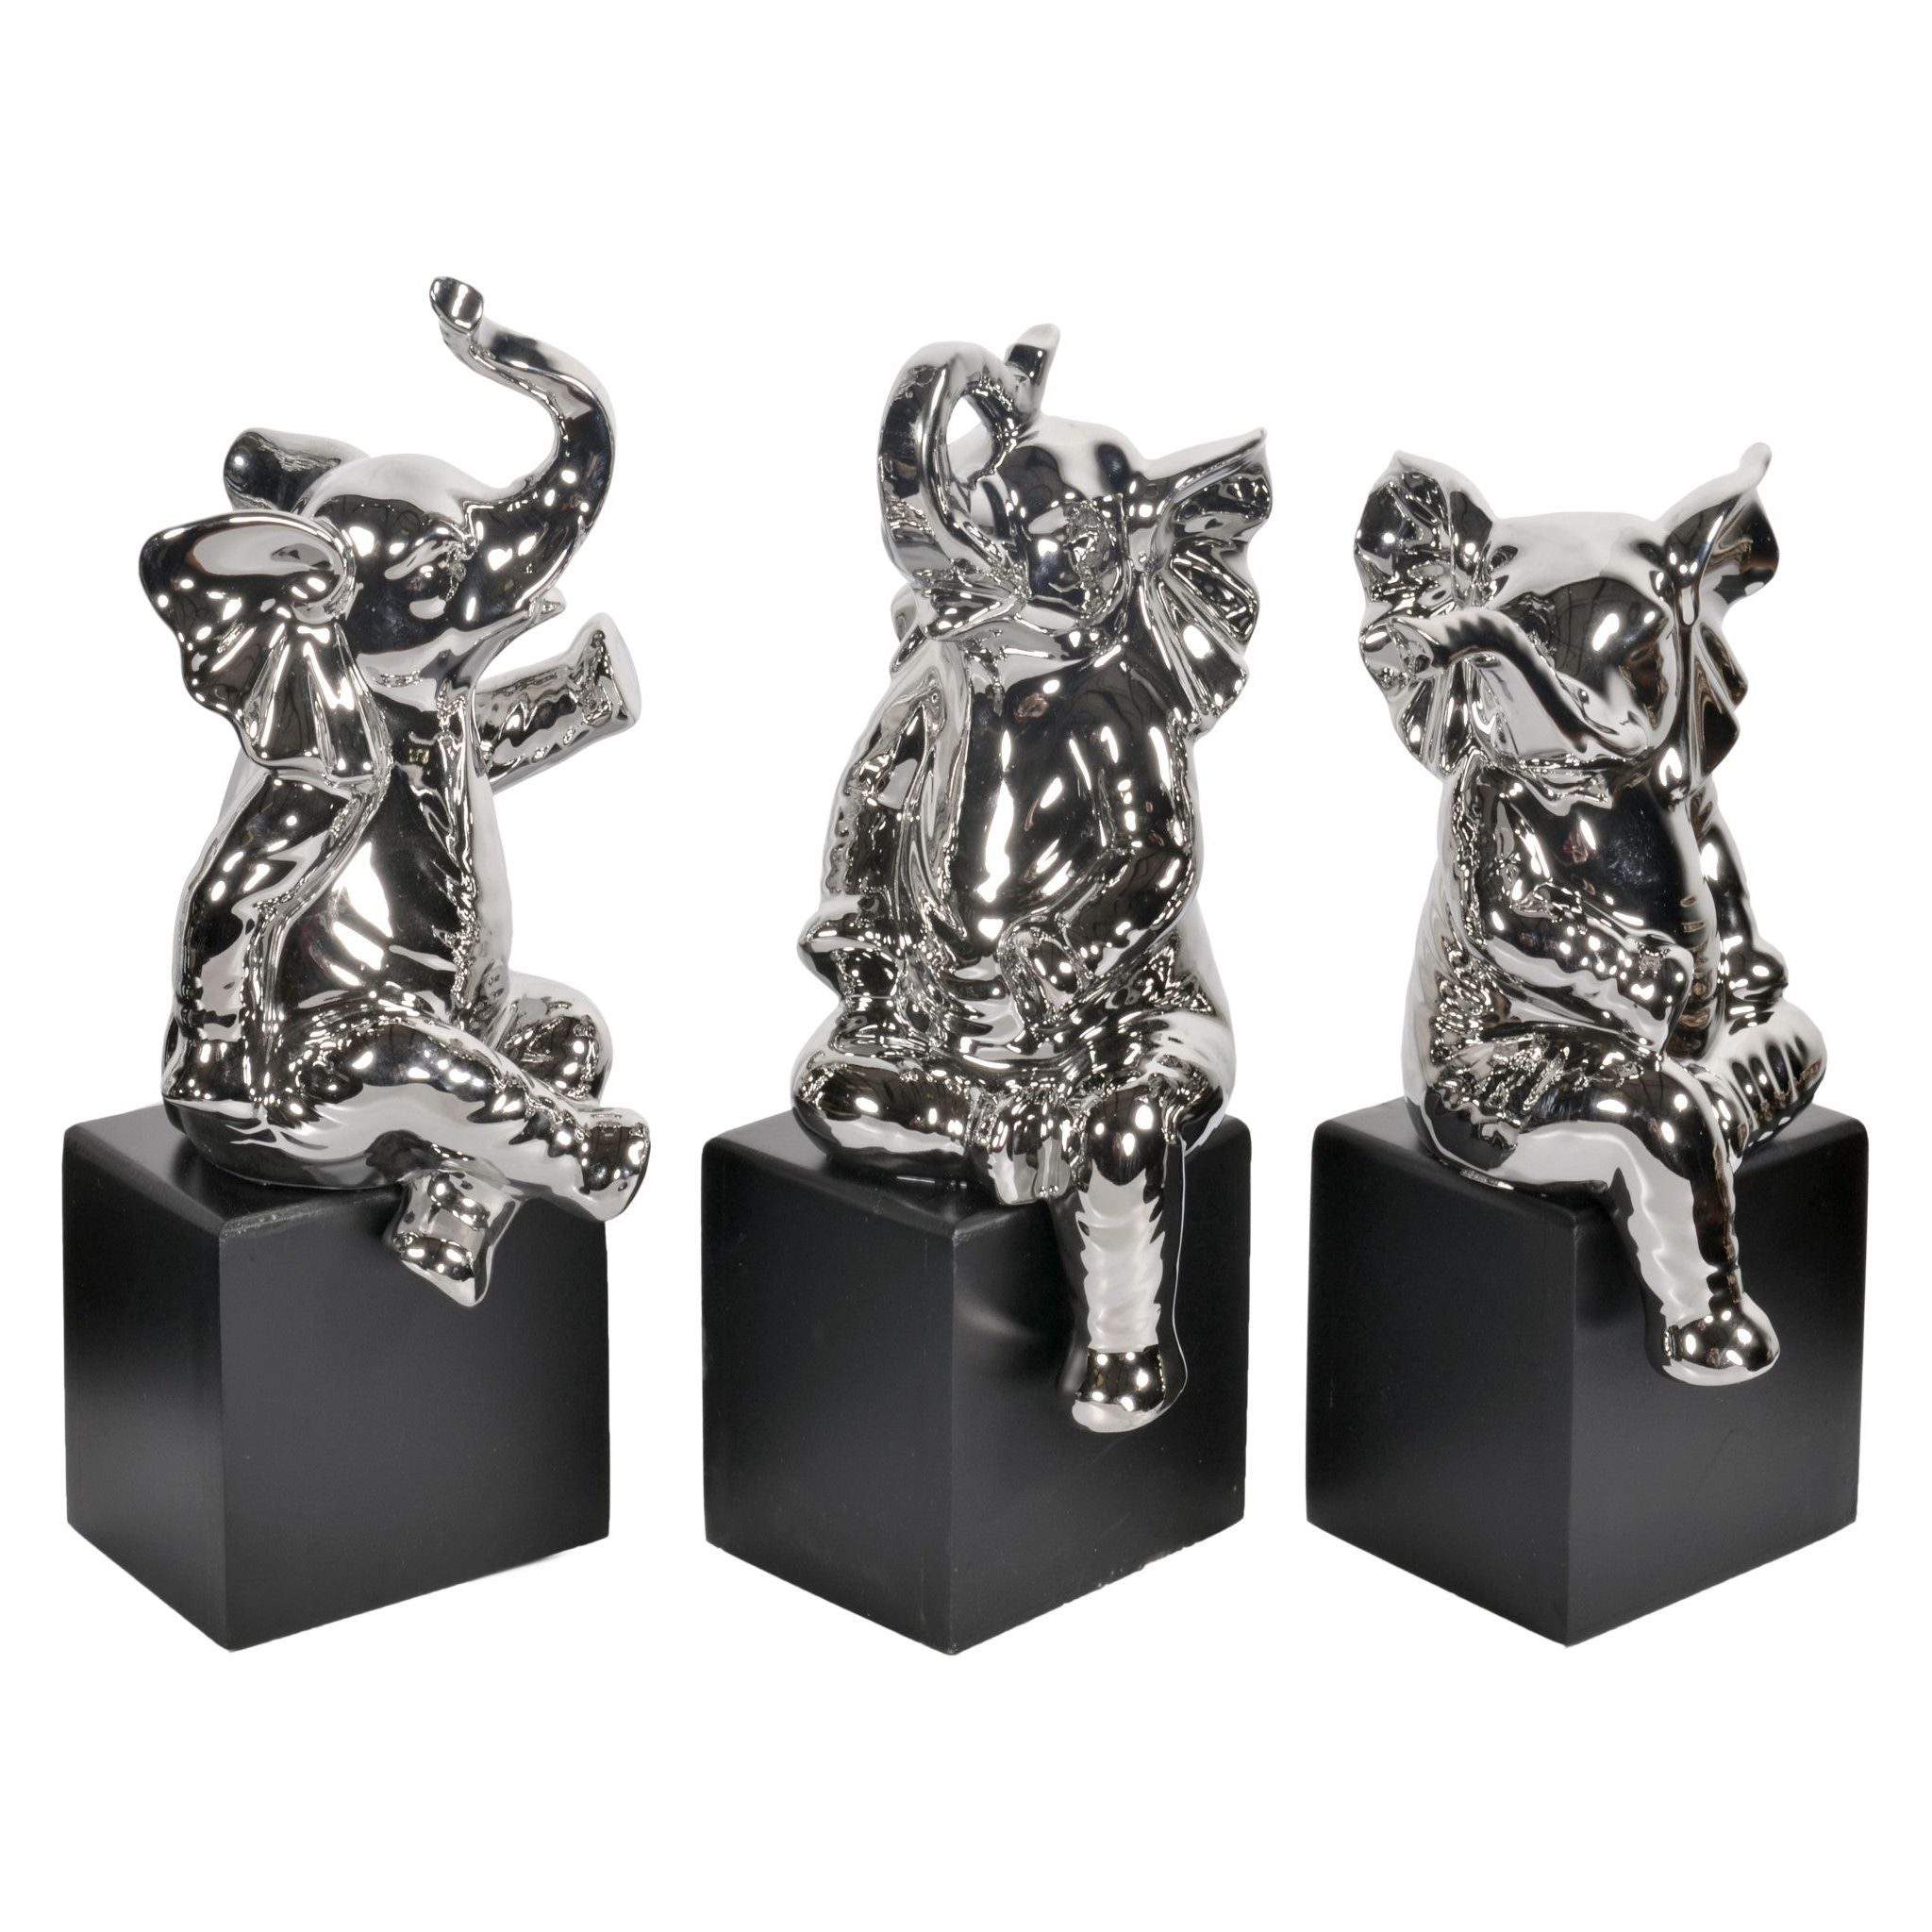 AFD Home  Mirrored Chrome Elephants Set of 3 on Bases - New Star Living